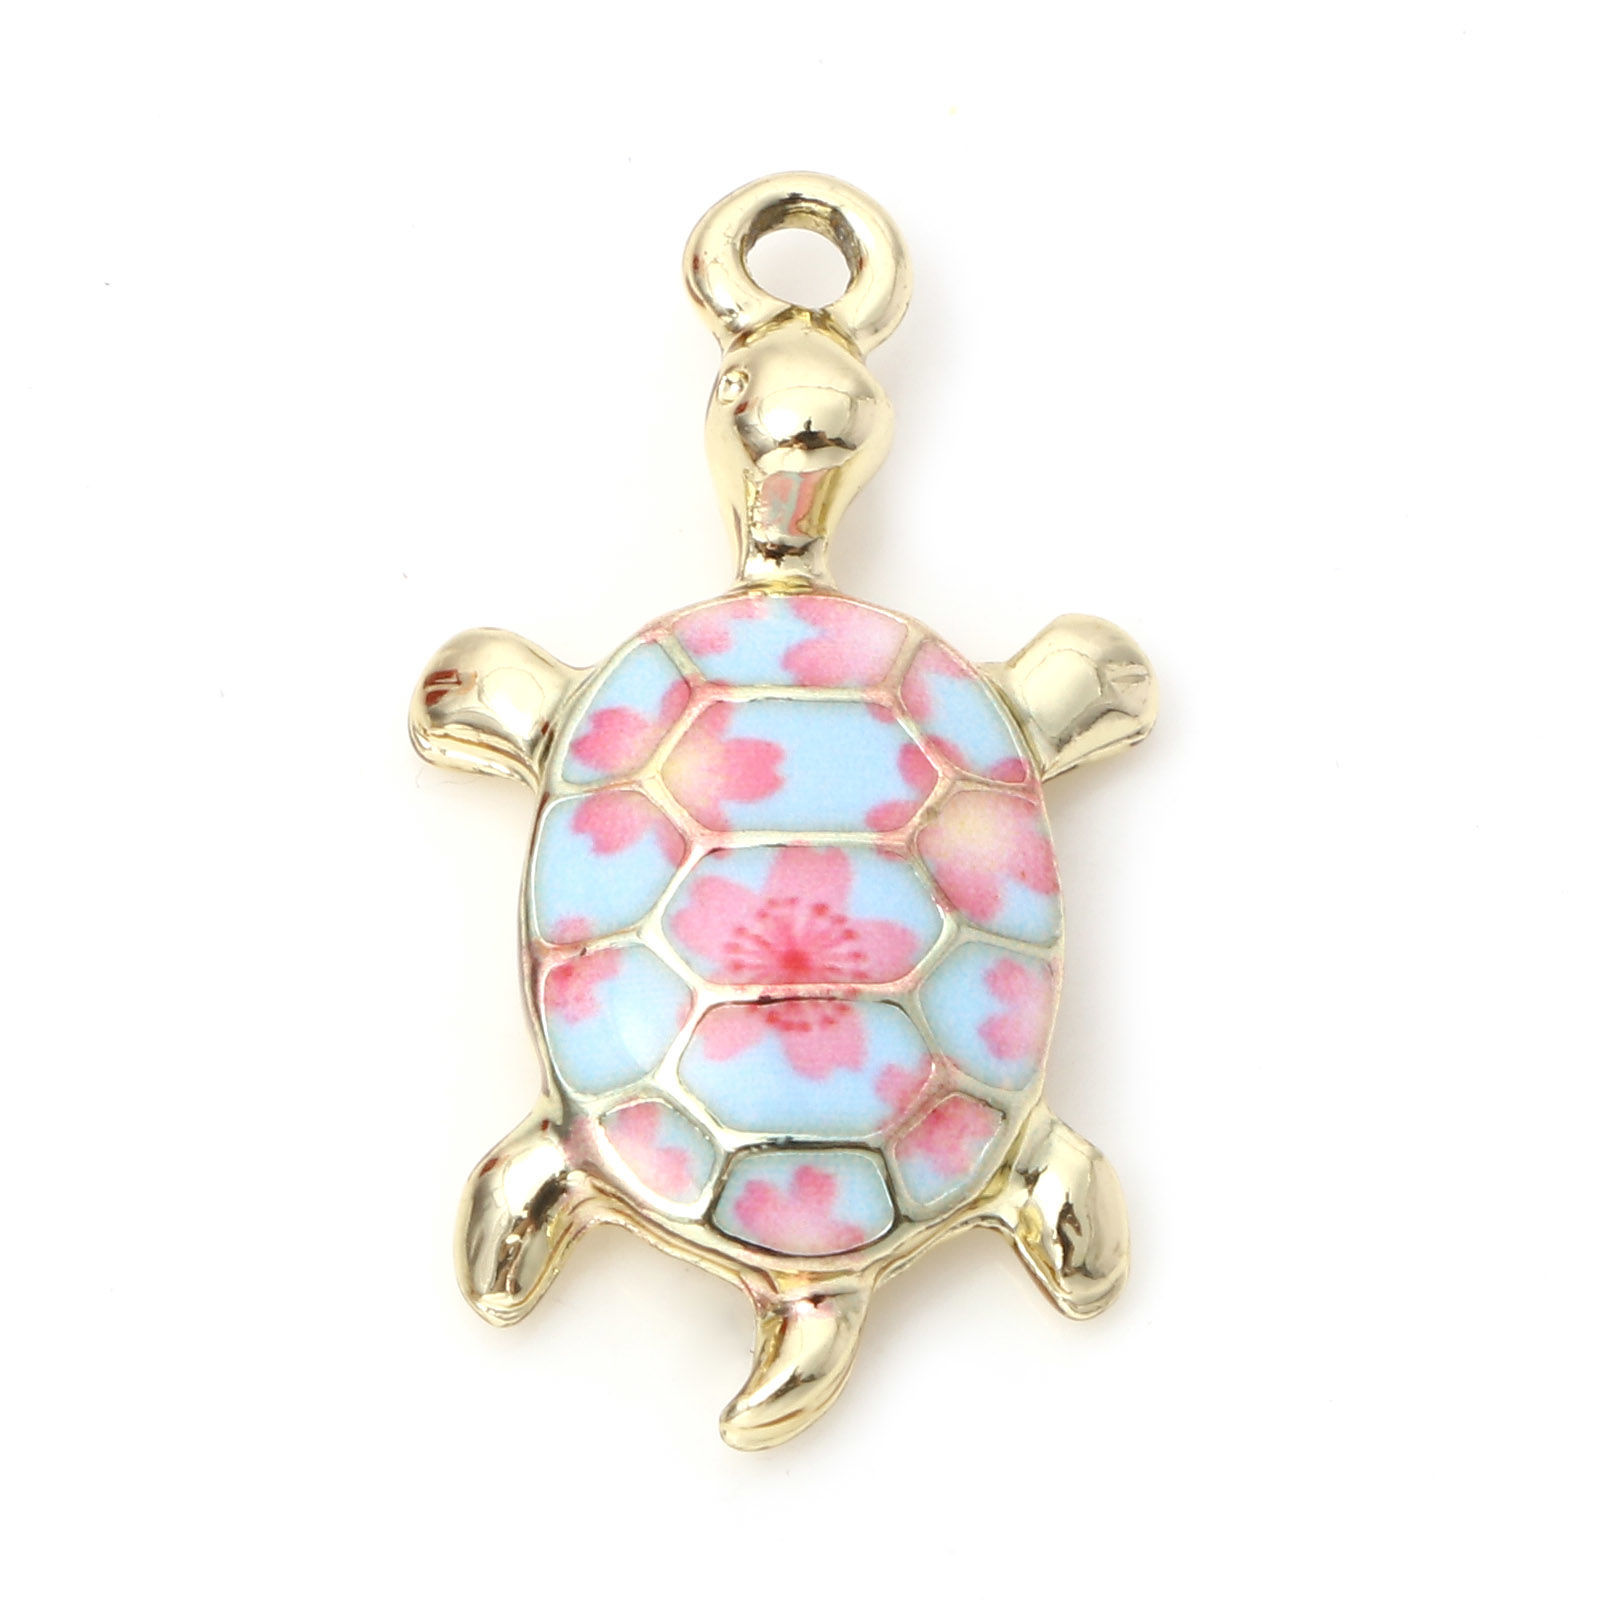 Picture of Zinc Based Alloy Ocean Jewelry Charms Gold Plated Blue & Pink Sea Turtle Animal Cherry Blossom Sakura Flower Enamel 24mm x 14mm, 10 PCs